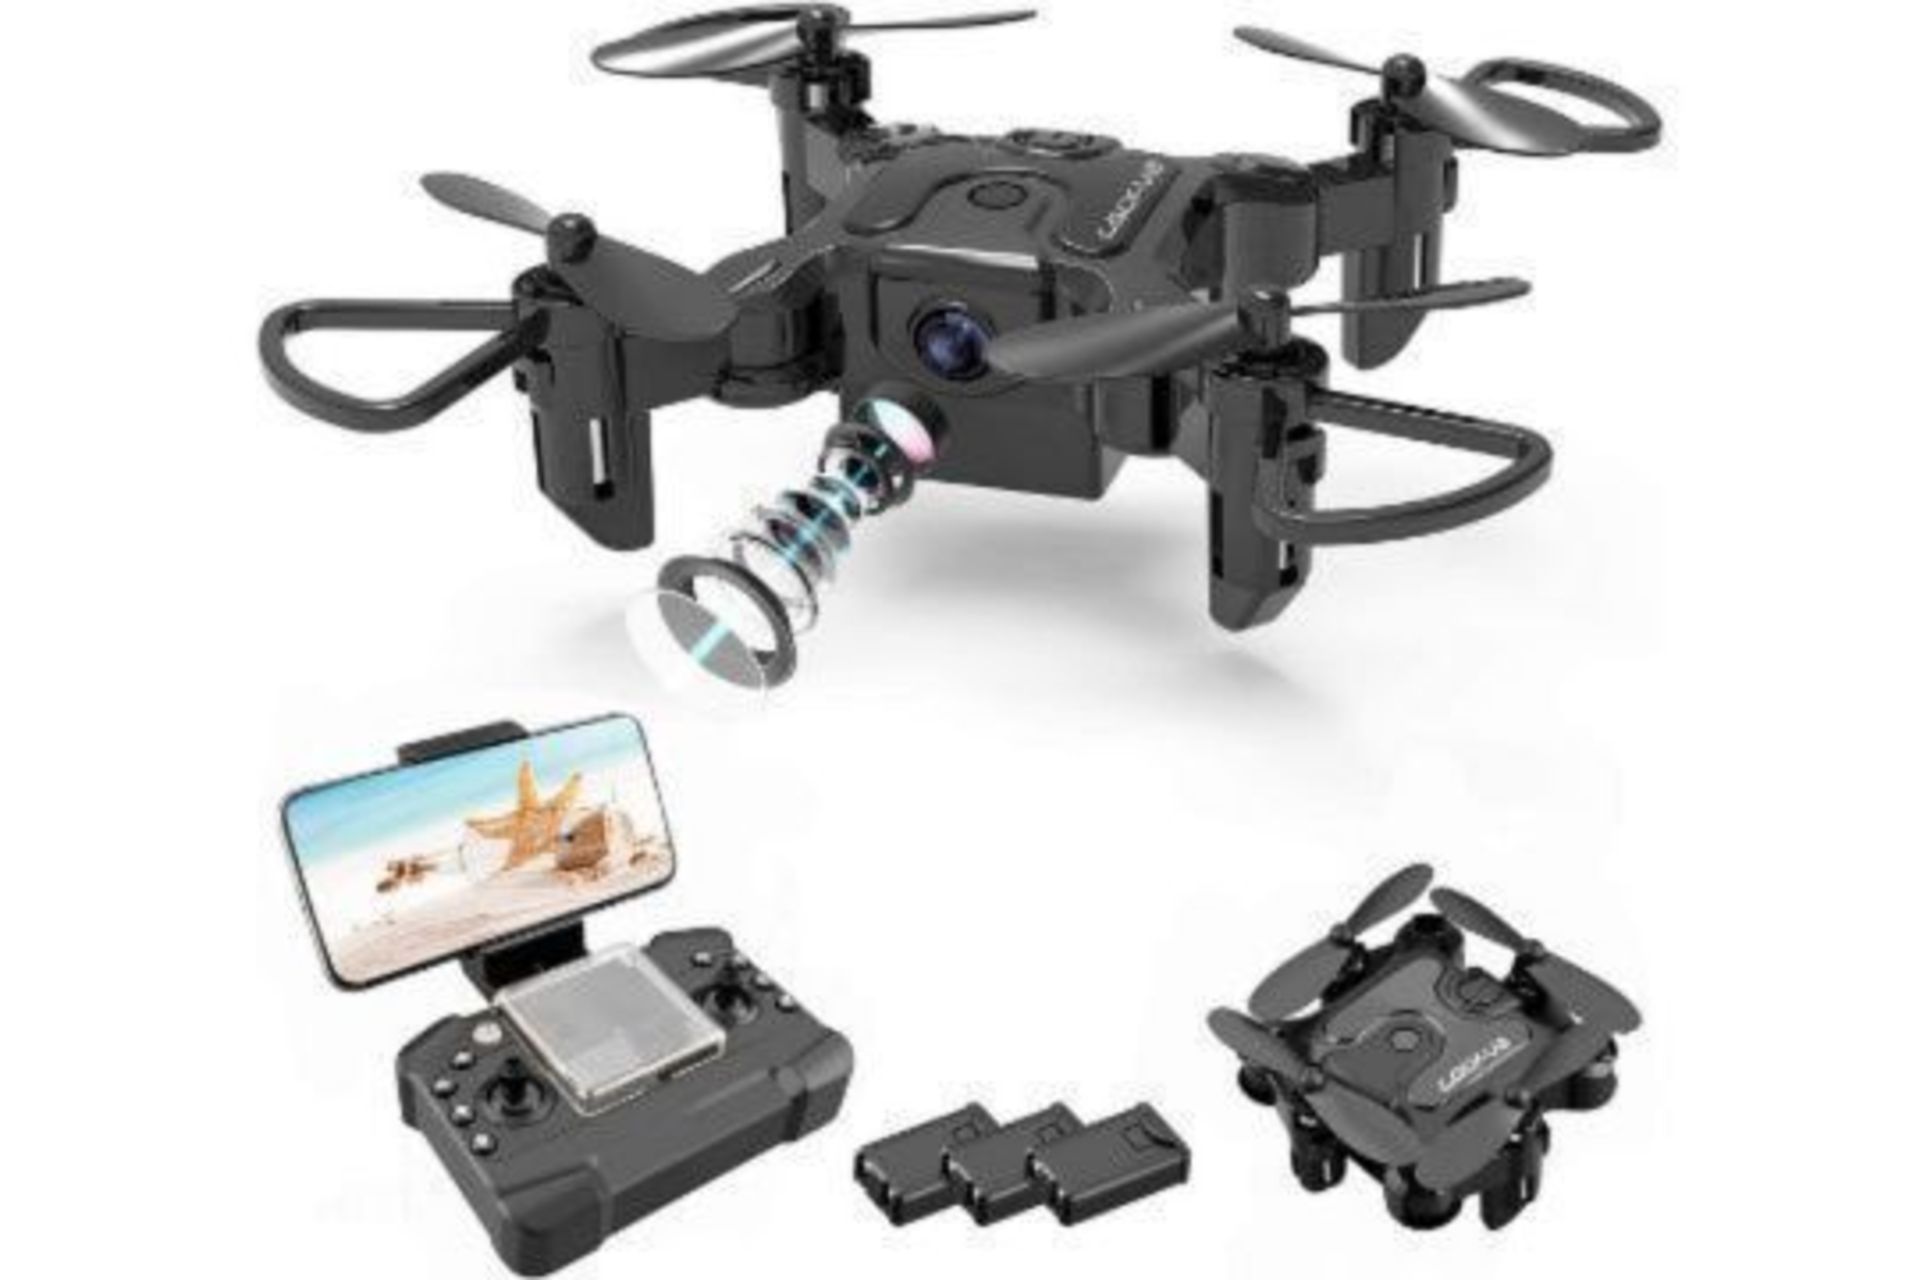 Boxed 4D-V2 Mini Drone (row4). ?HD Pictures and Live Videos?:V2 equipped with 720P HD Wi-Fi camera